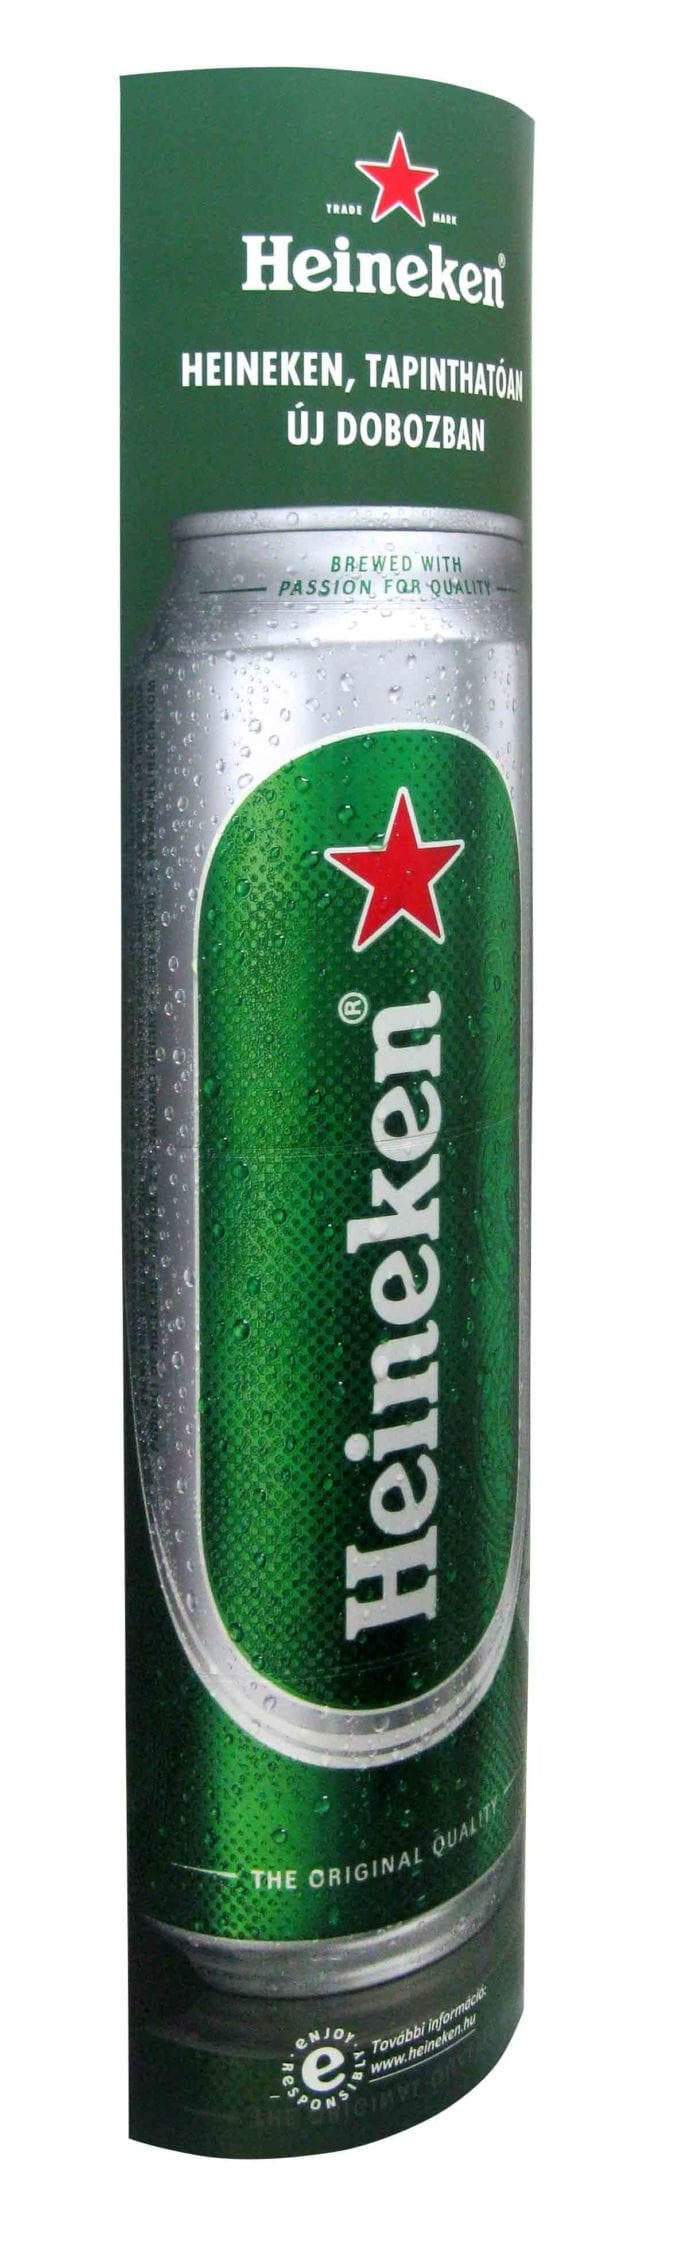 Heineken This is not just another cardboard, retail sign. This patented system is quick and easy to assemble. It’s foldable and economical to ship. Our high quality graphic print capabilities and graphic design team allow us to fully customize each display for your specific needs. We offer multiple sizes and all of our corrugated displays and signs are made from sustainable and recyclable materials. The Flash Totem is a great value for little cost. We offer the best in-store, point of purchase signs and displays on the market today. We can help you come up with a design that will make an impact in retail stores everywhere and maximize your ROI. Contact us today to get your free quote at https://www.landaal.com